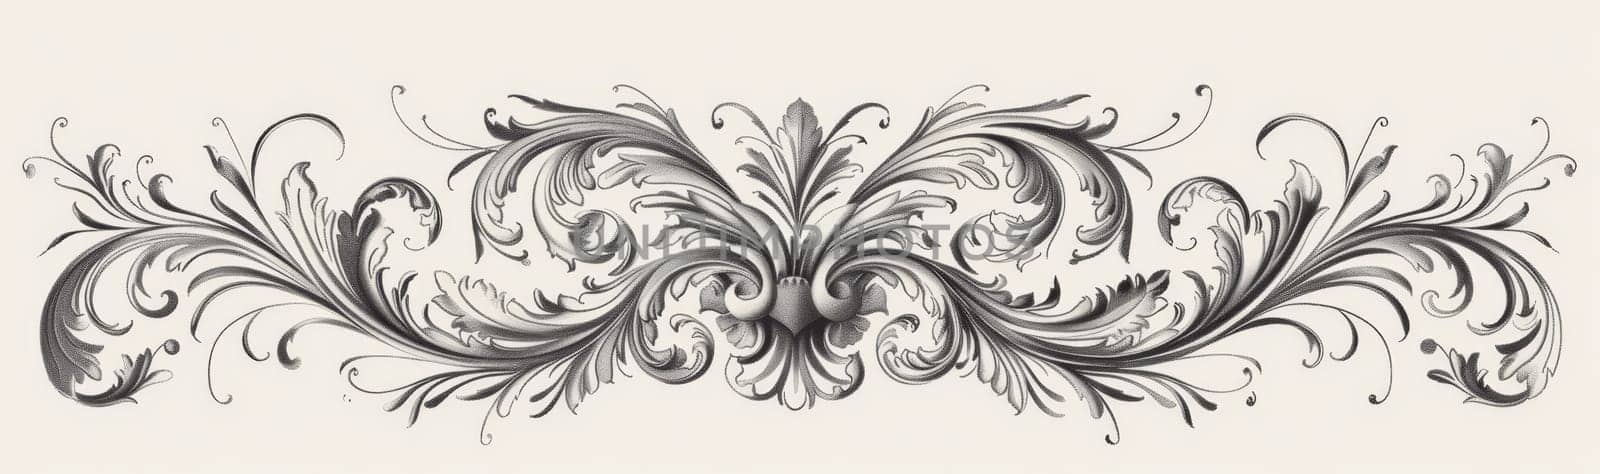 Baroque-style decorative elements with detailed floral patterns and elegant swirls in monochromatic tones.. by sfinks